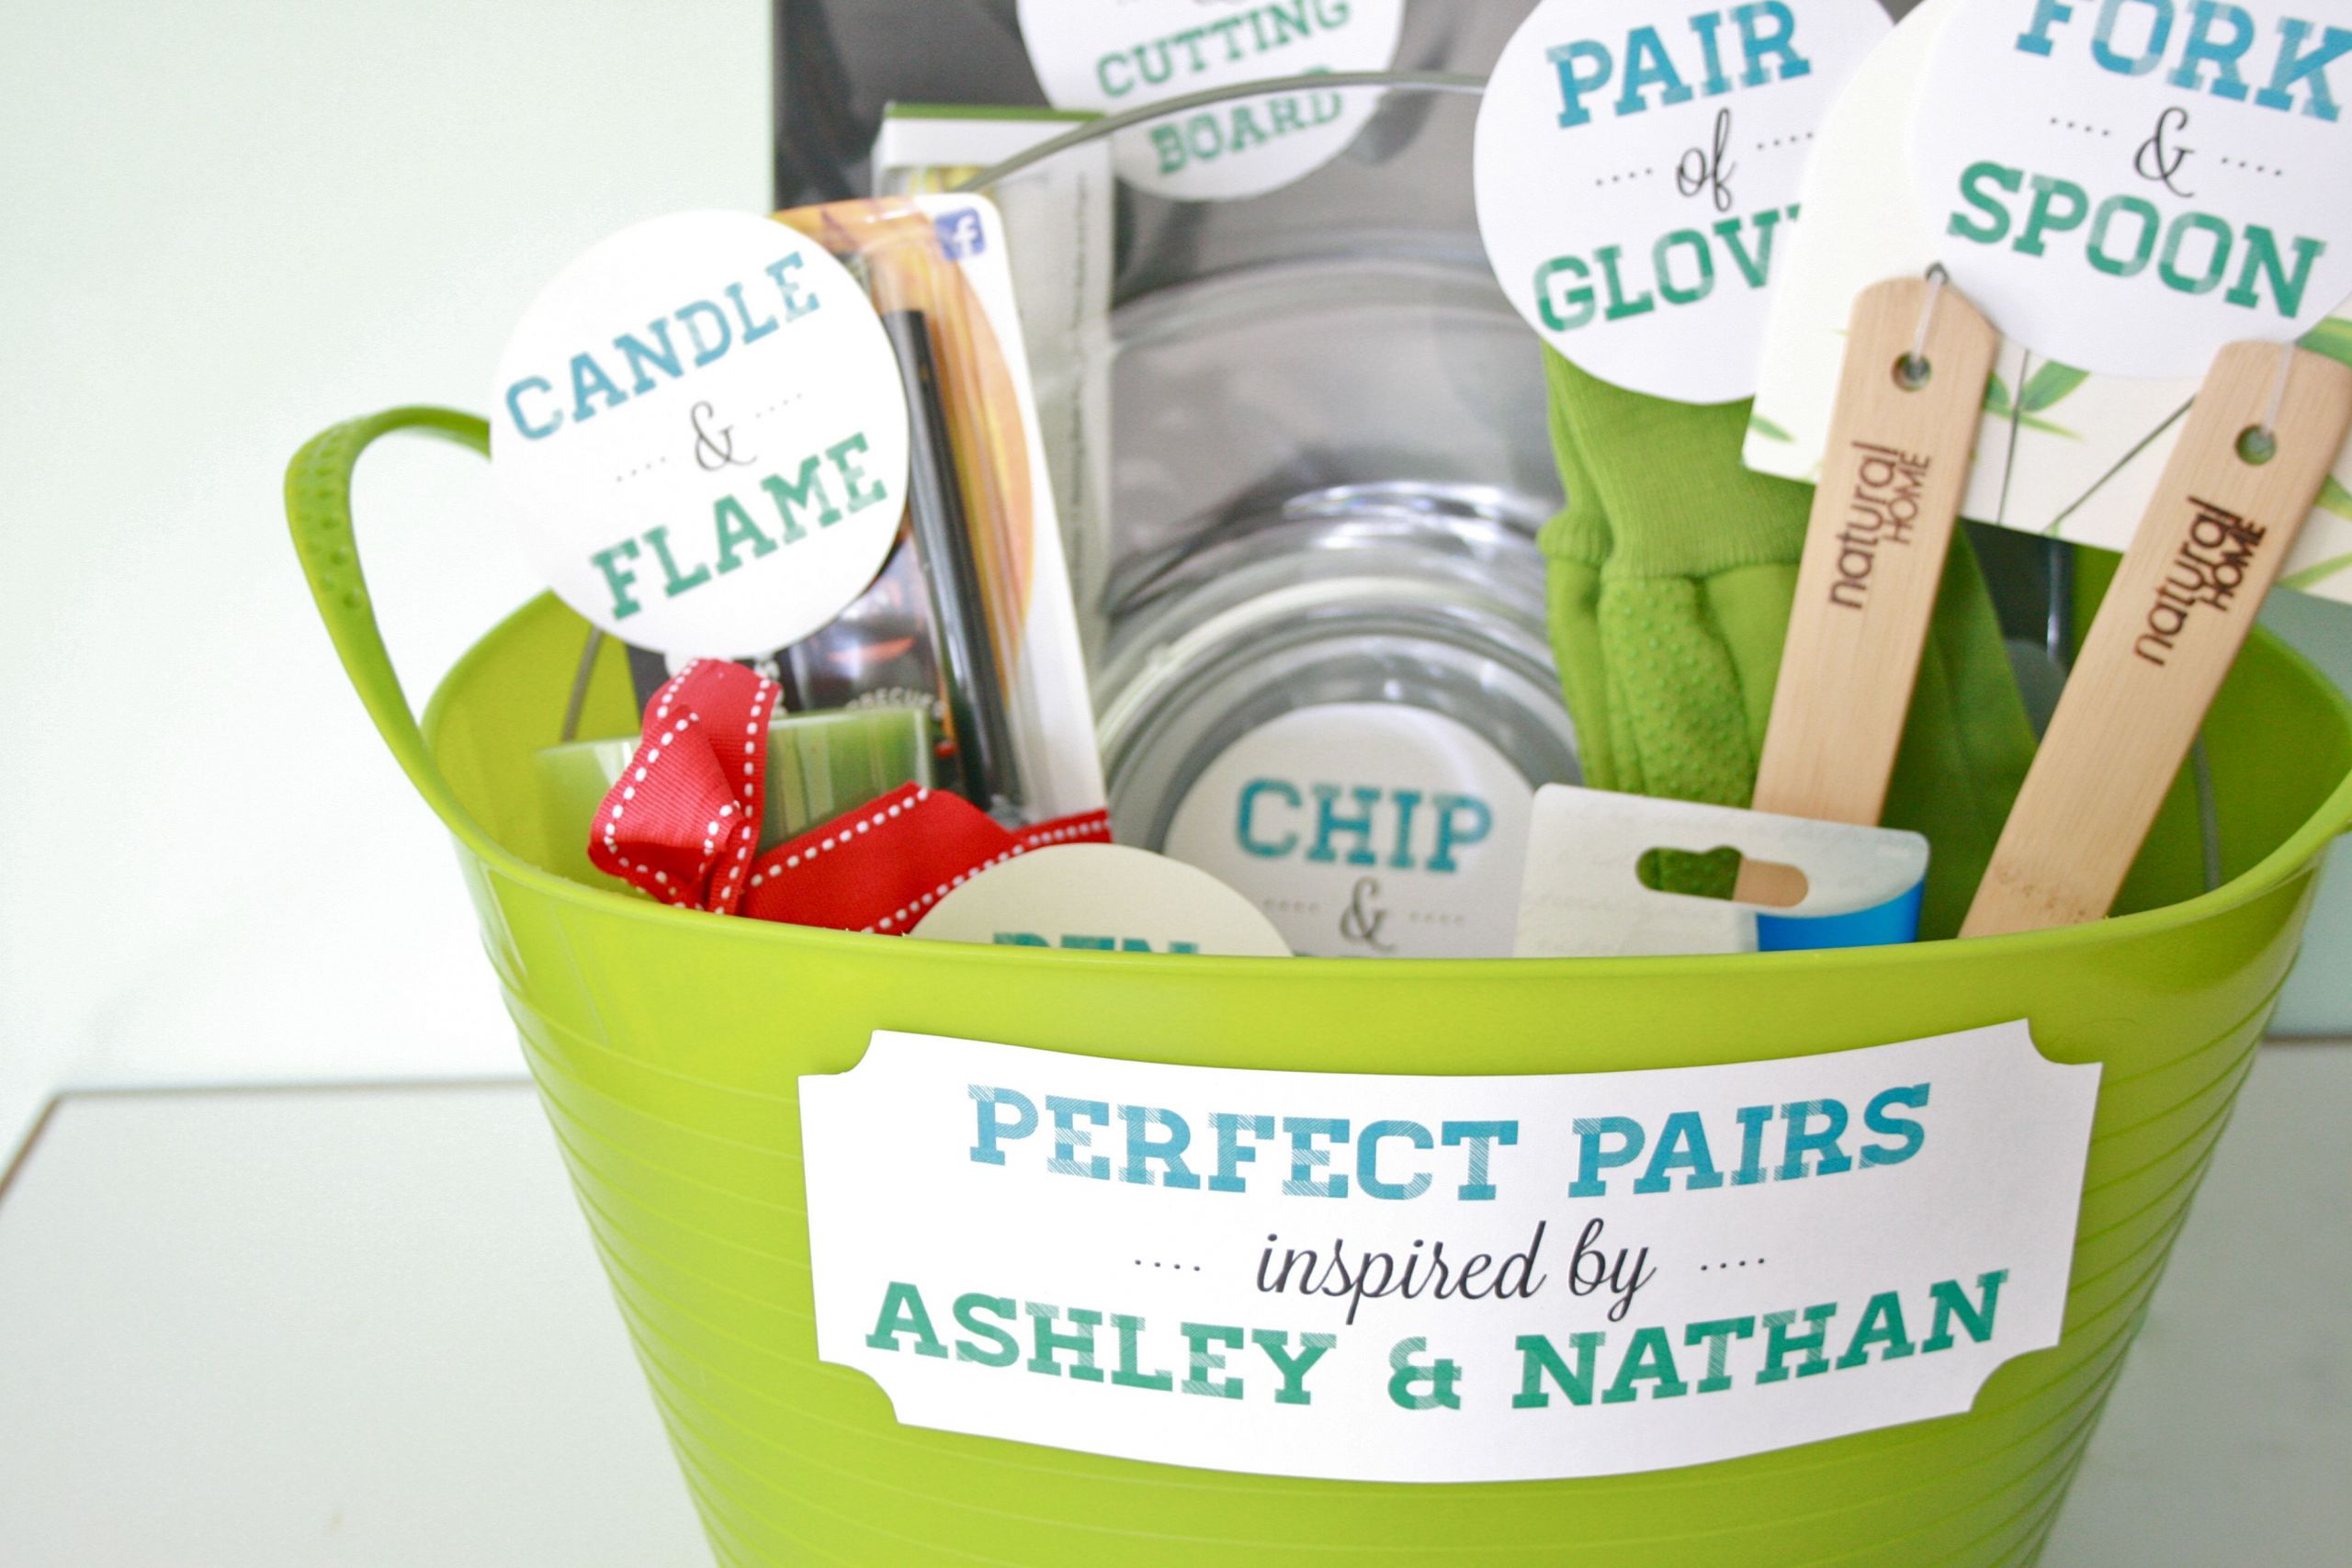 Couples Shower Gift Ideas
 DIY "Perfect Pairs" Bridal Shower Gift